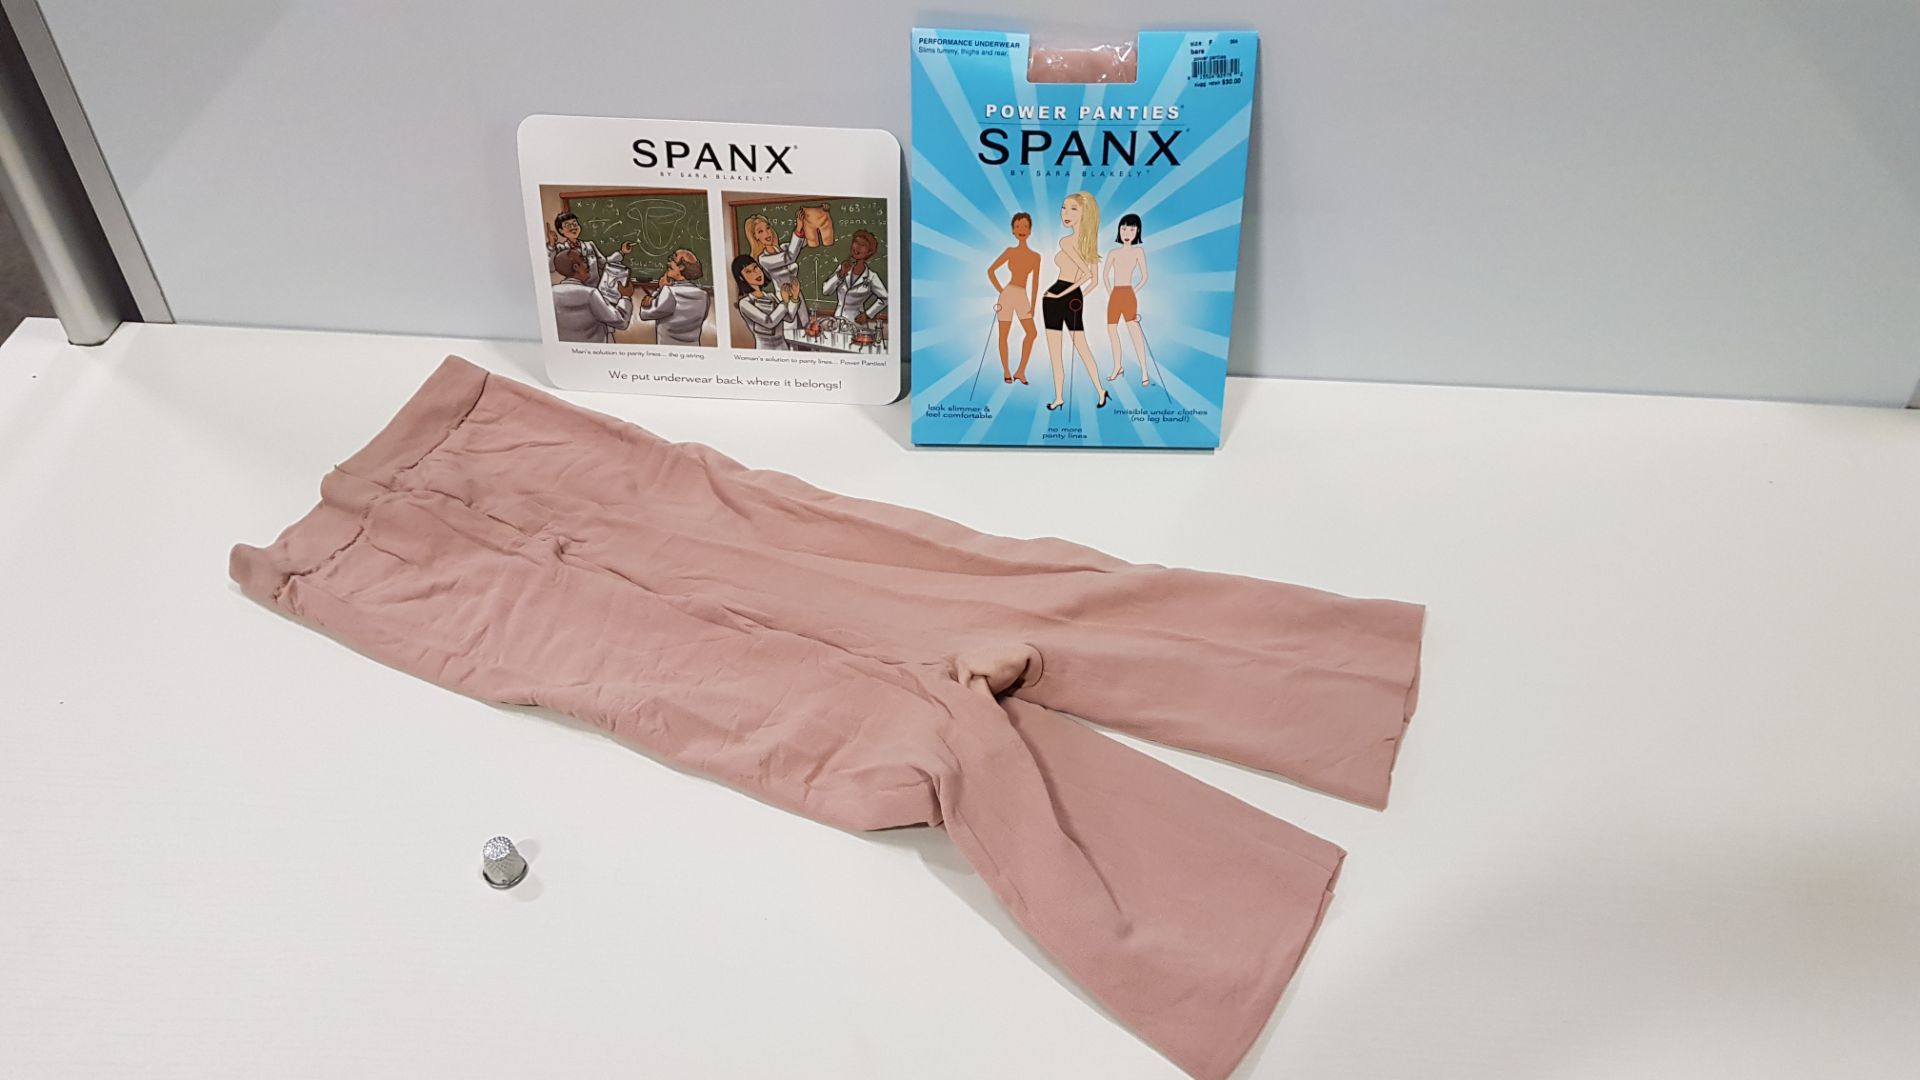 15 X BRAND NEW SPANX BARE SIZE F POWER PANTIES RRP $30.00 (PICK LOOSE)